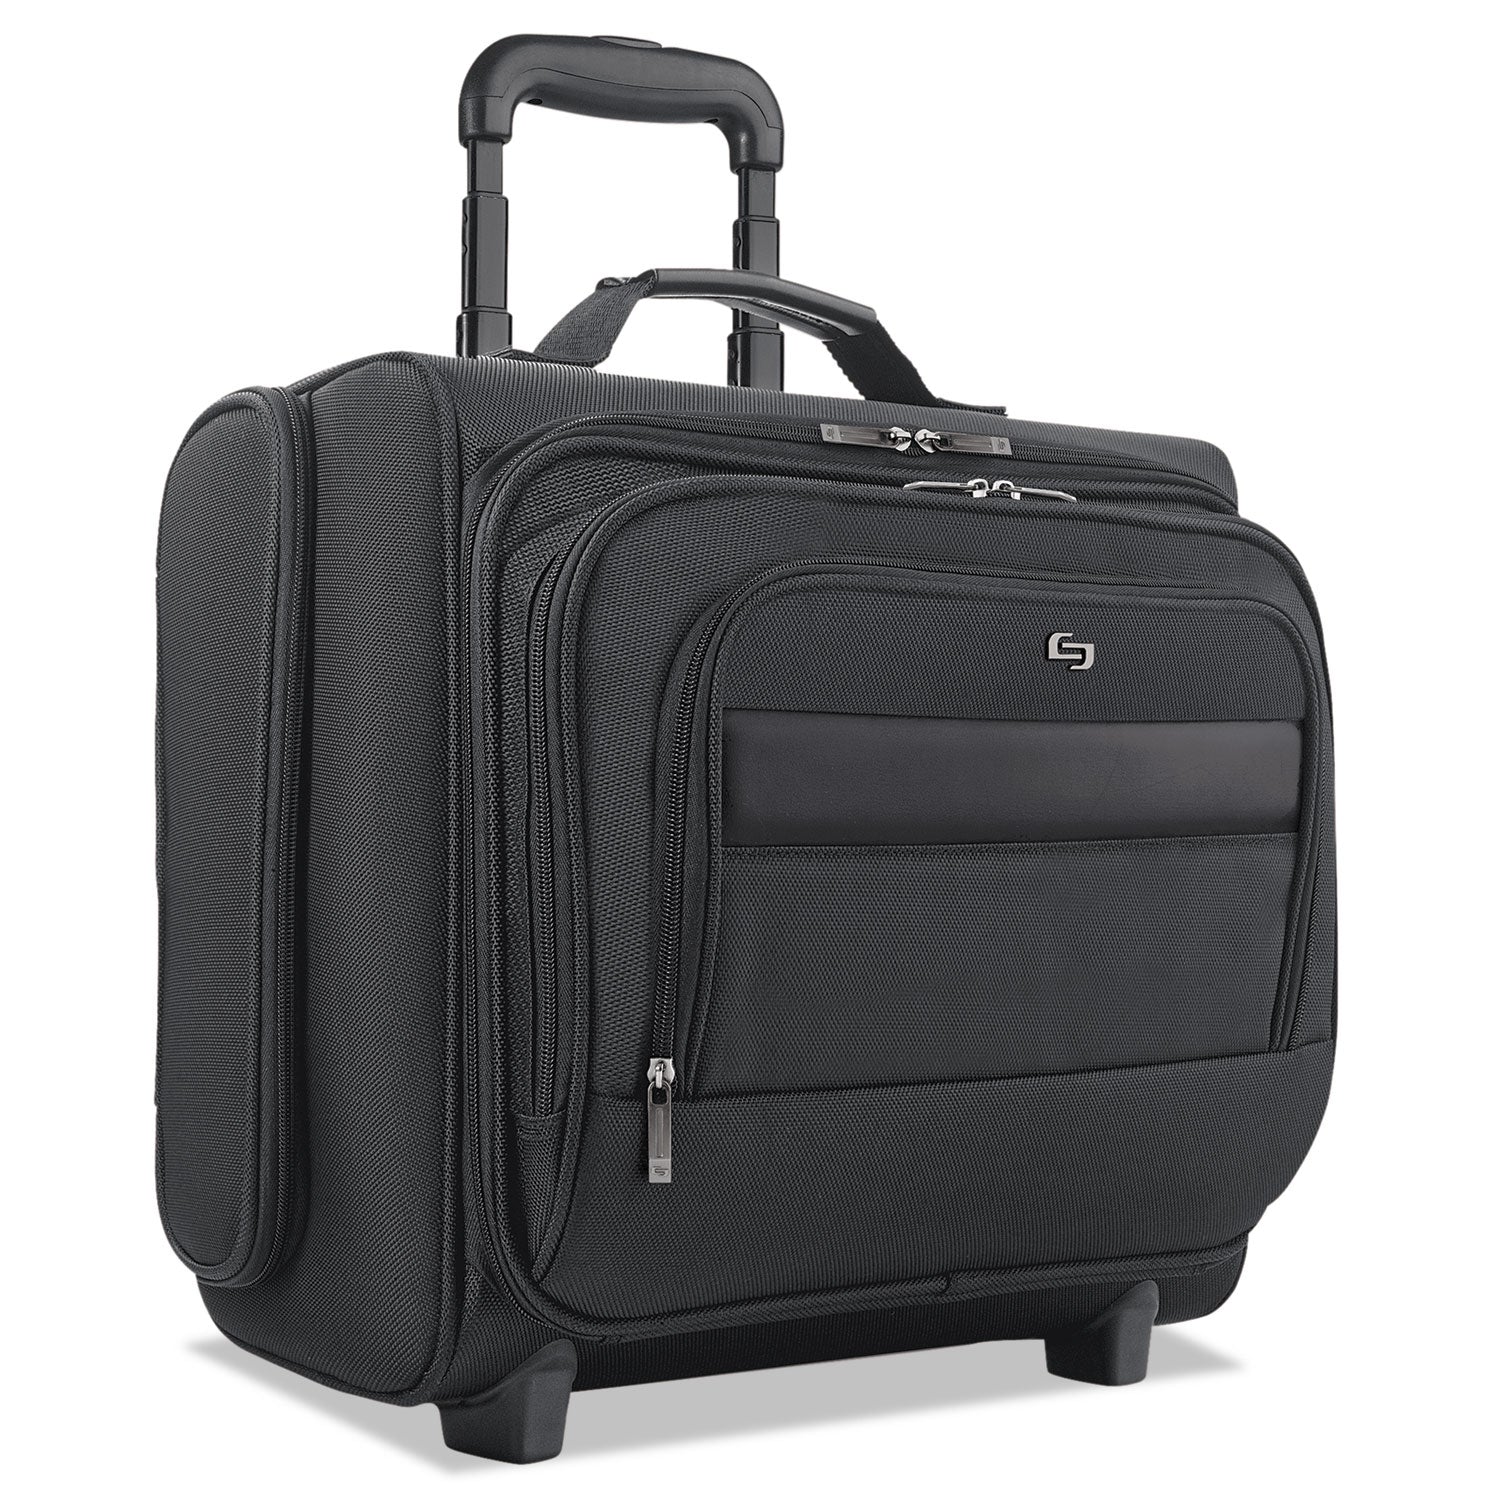 Classic Rolling Overnighter Case, Fits Devices Up to 15.6", Ballistic Polyester, 16.14 x 6.69 x 13.78, Black - 